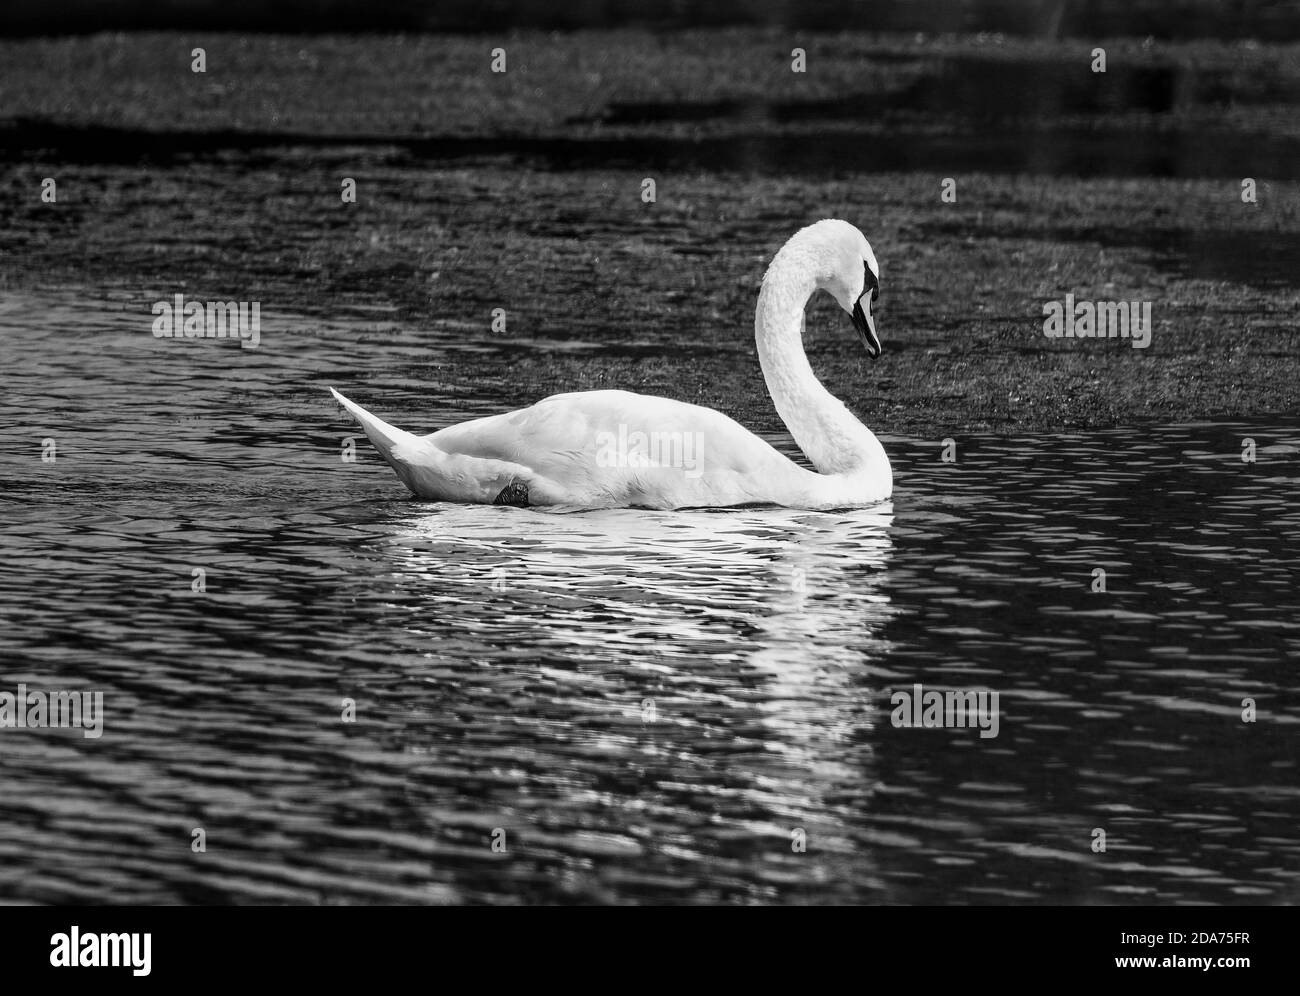 black and white image of a swan on a lake Stock Photo